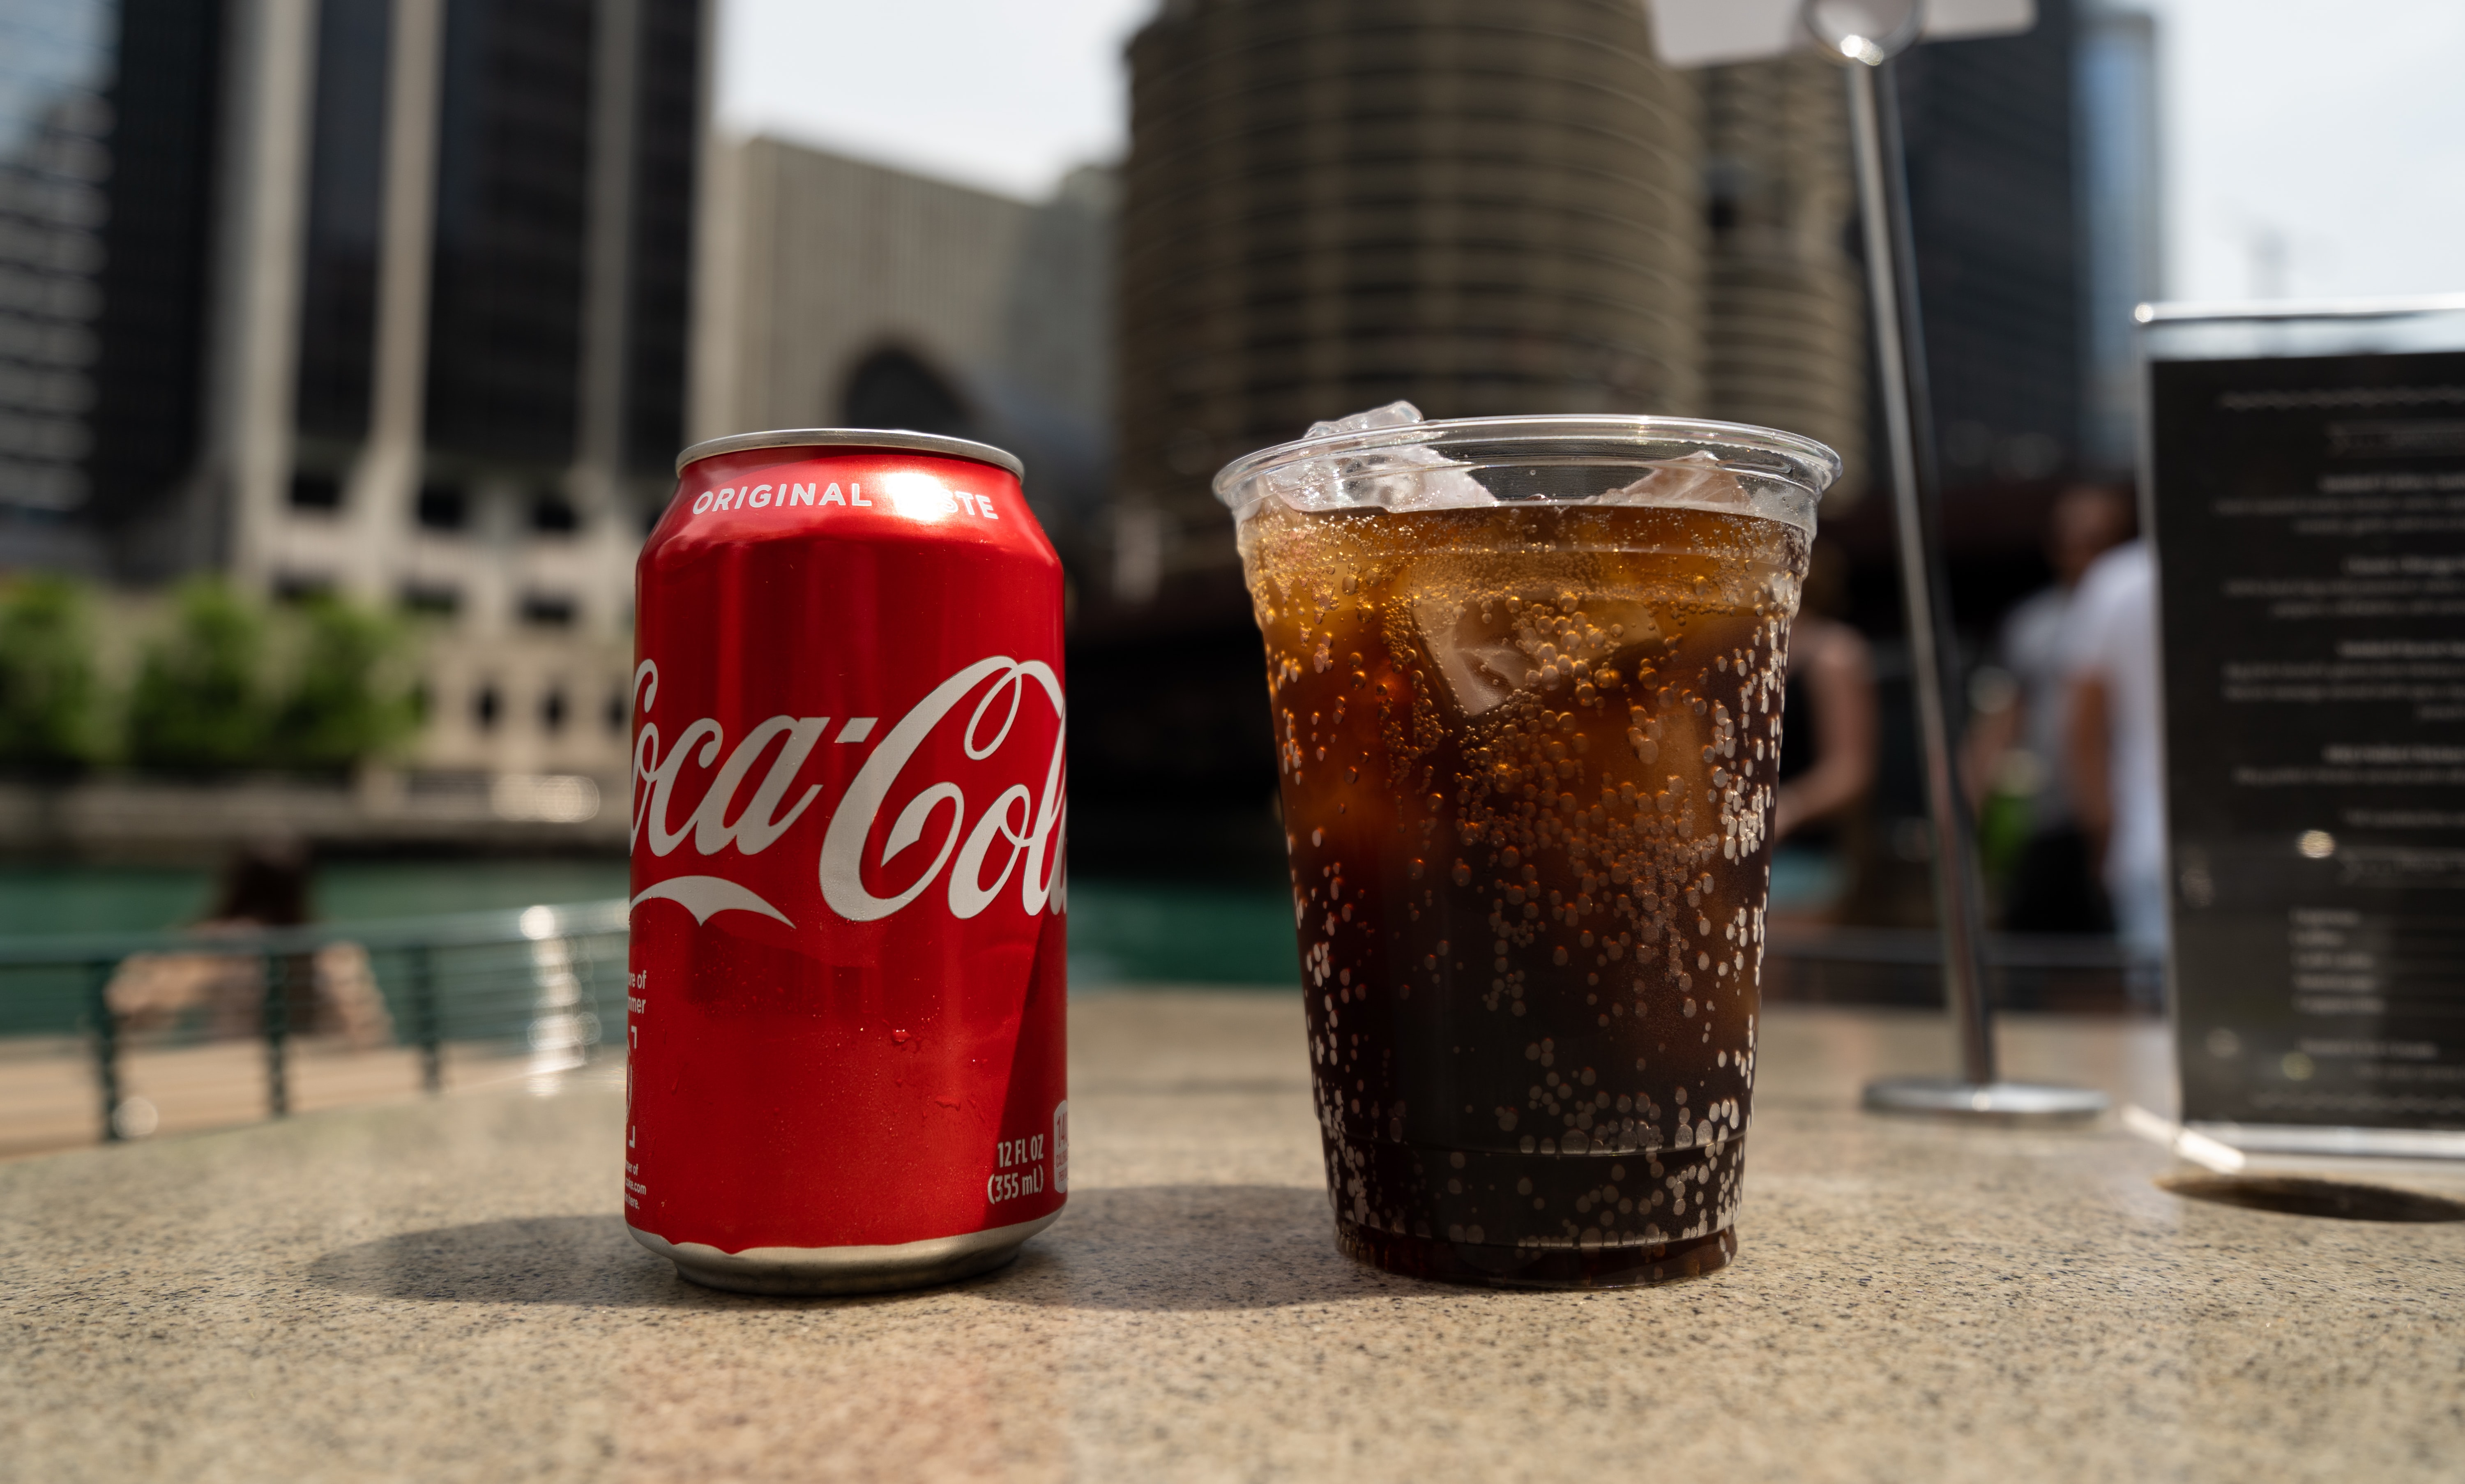 Coca-Cola in a glass with a can